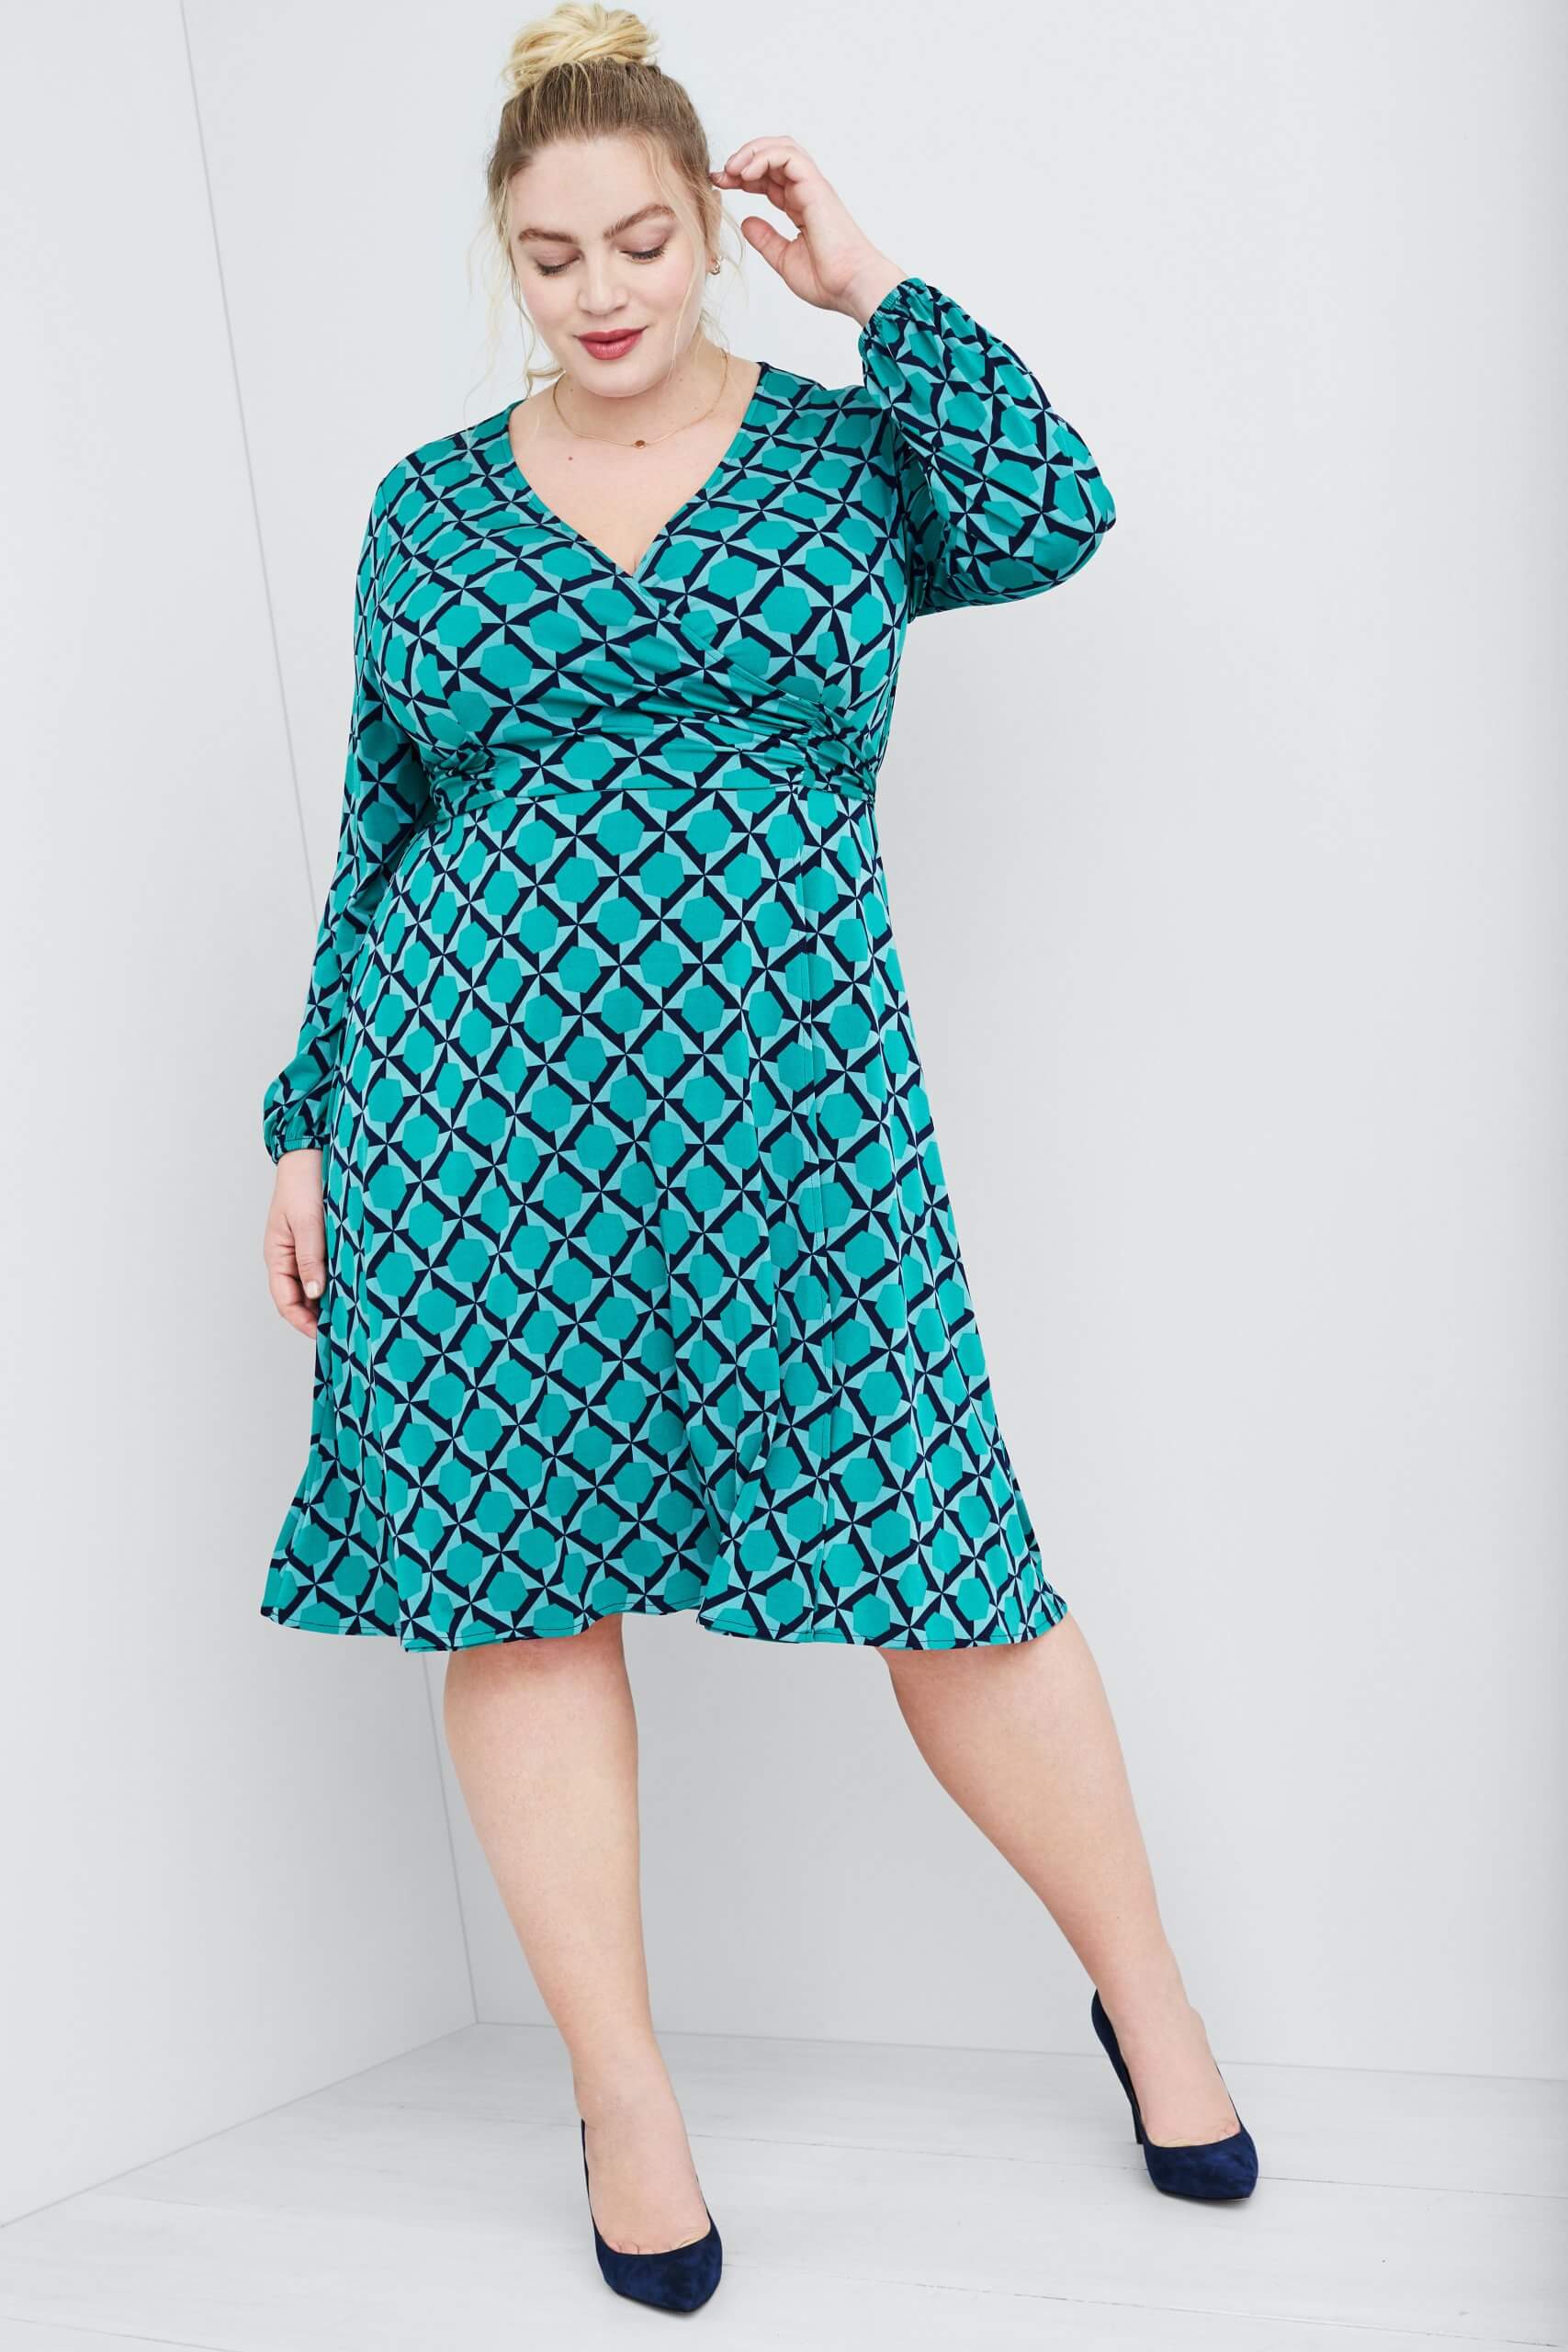 Stitch Fix Women's model wearing teal green abstract print wrap dress and navy heels.